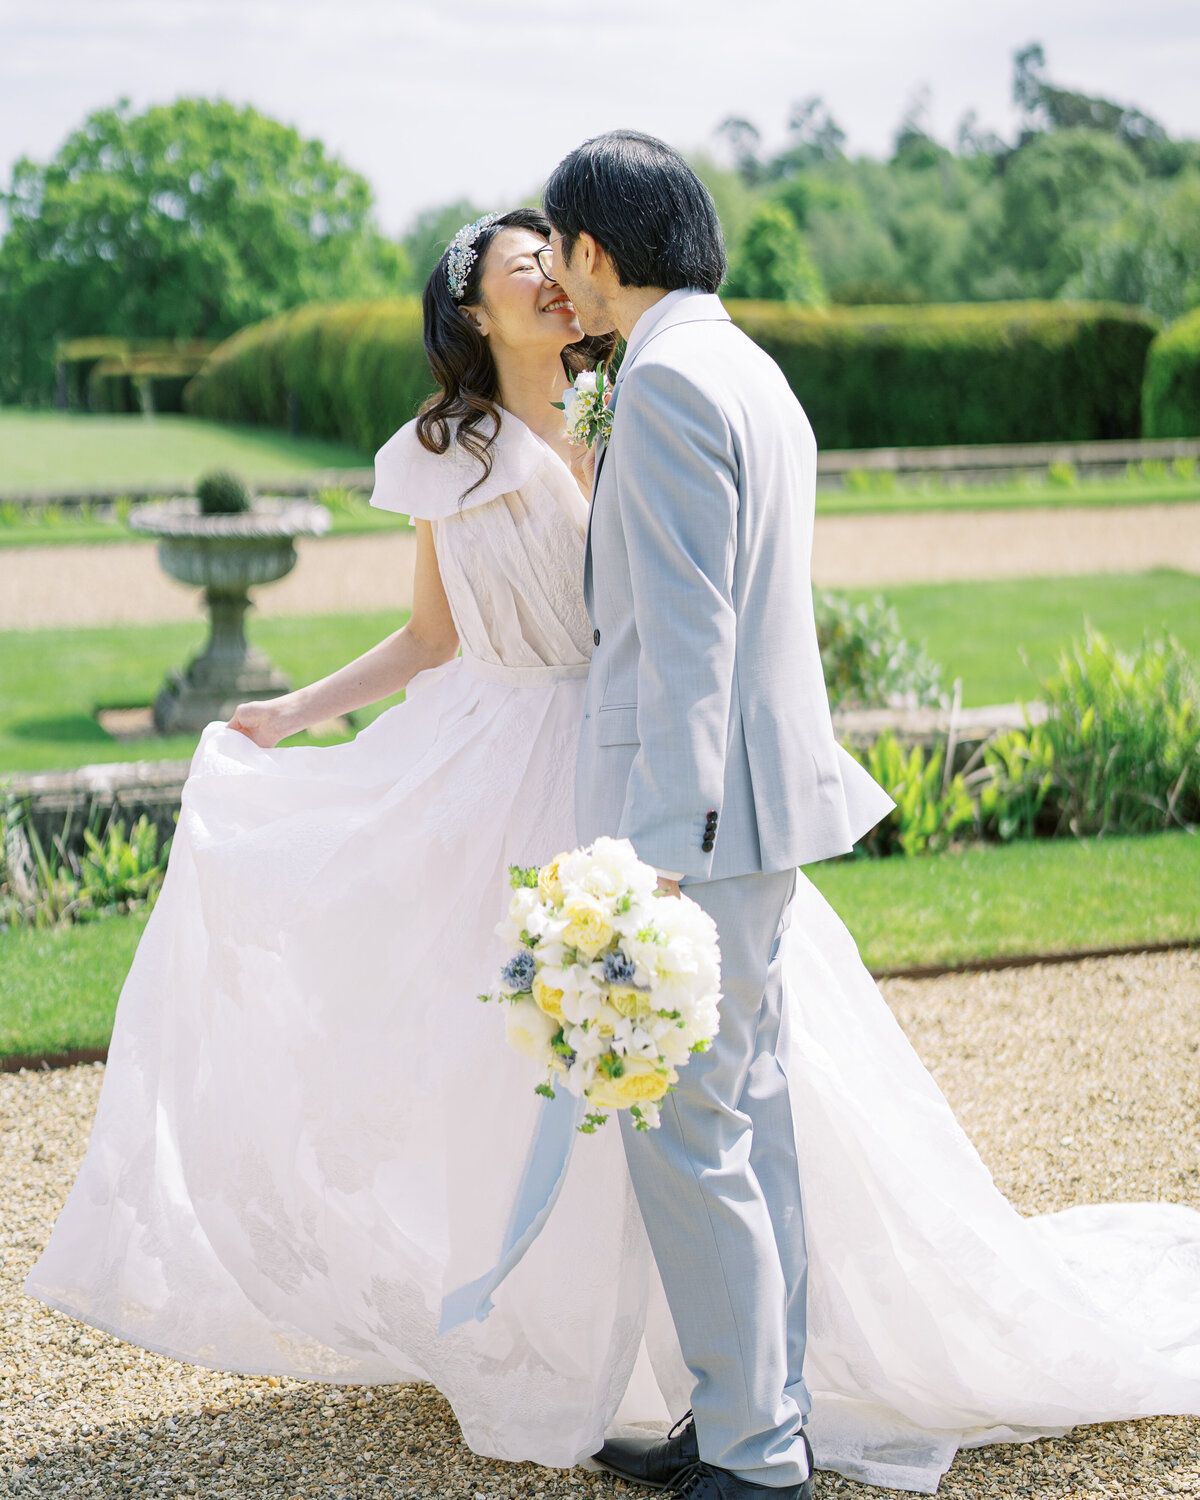 Bride and groom during portraits at stately home wedding venue Somerley House